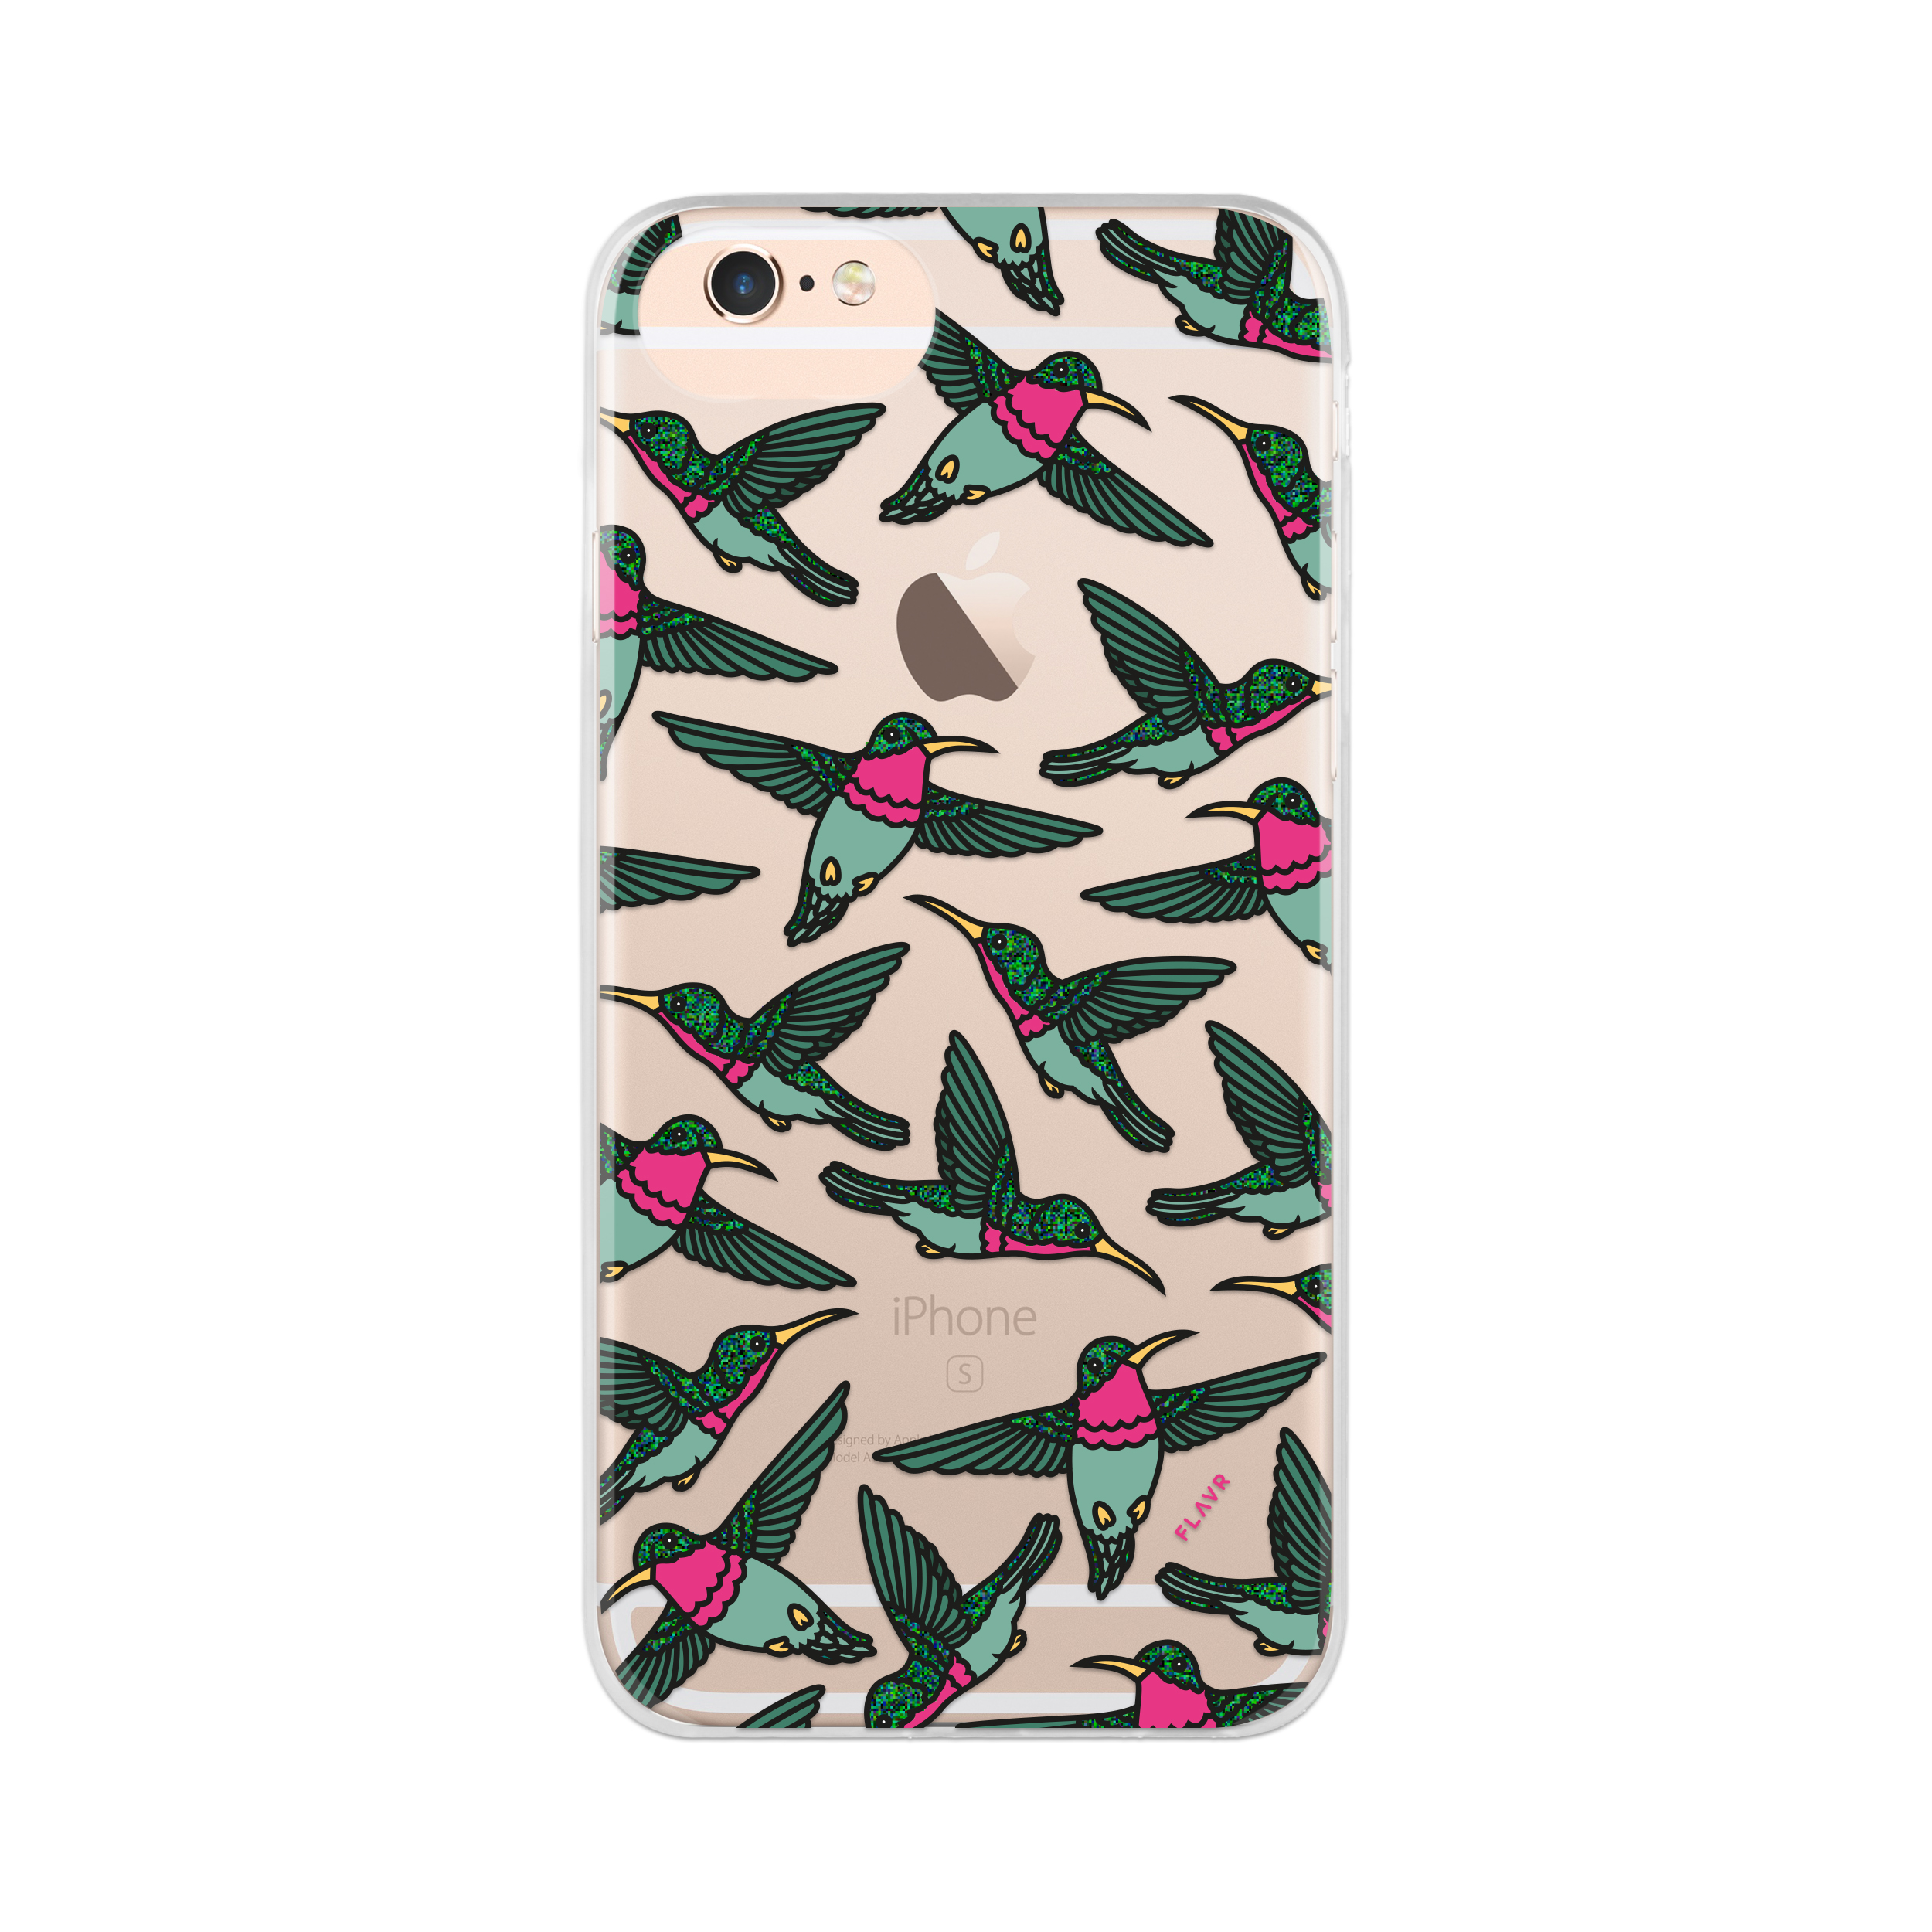 FLAVR iPlate Backcover, Hummingbirds, IPHONE APPLE, COLOURFUL 6/6S/7/8/SE20